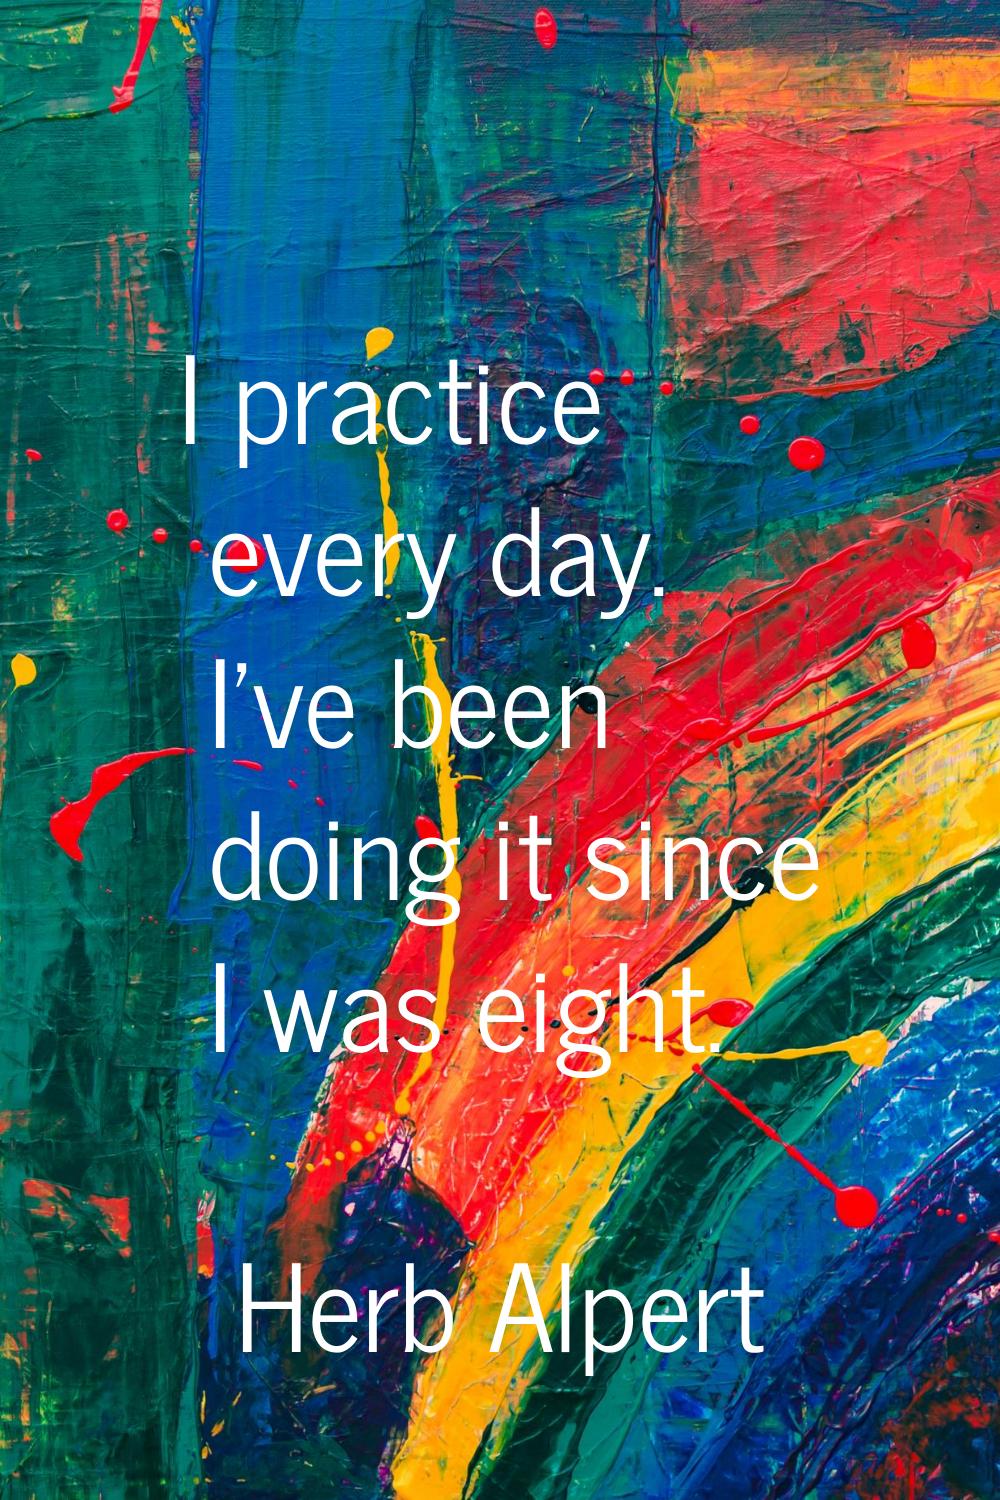 I practice every day. I've been doing it since I was eight.